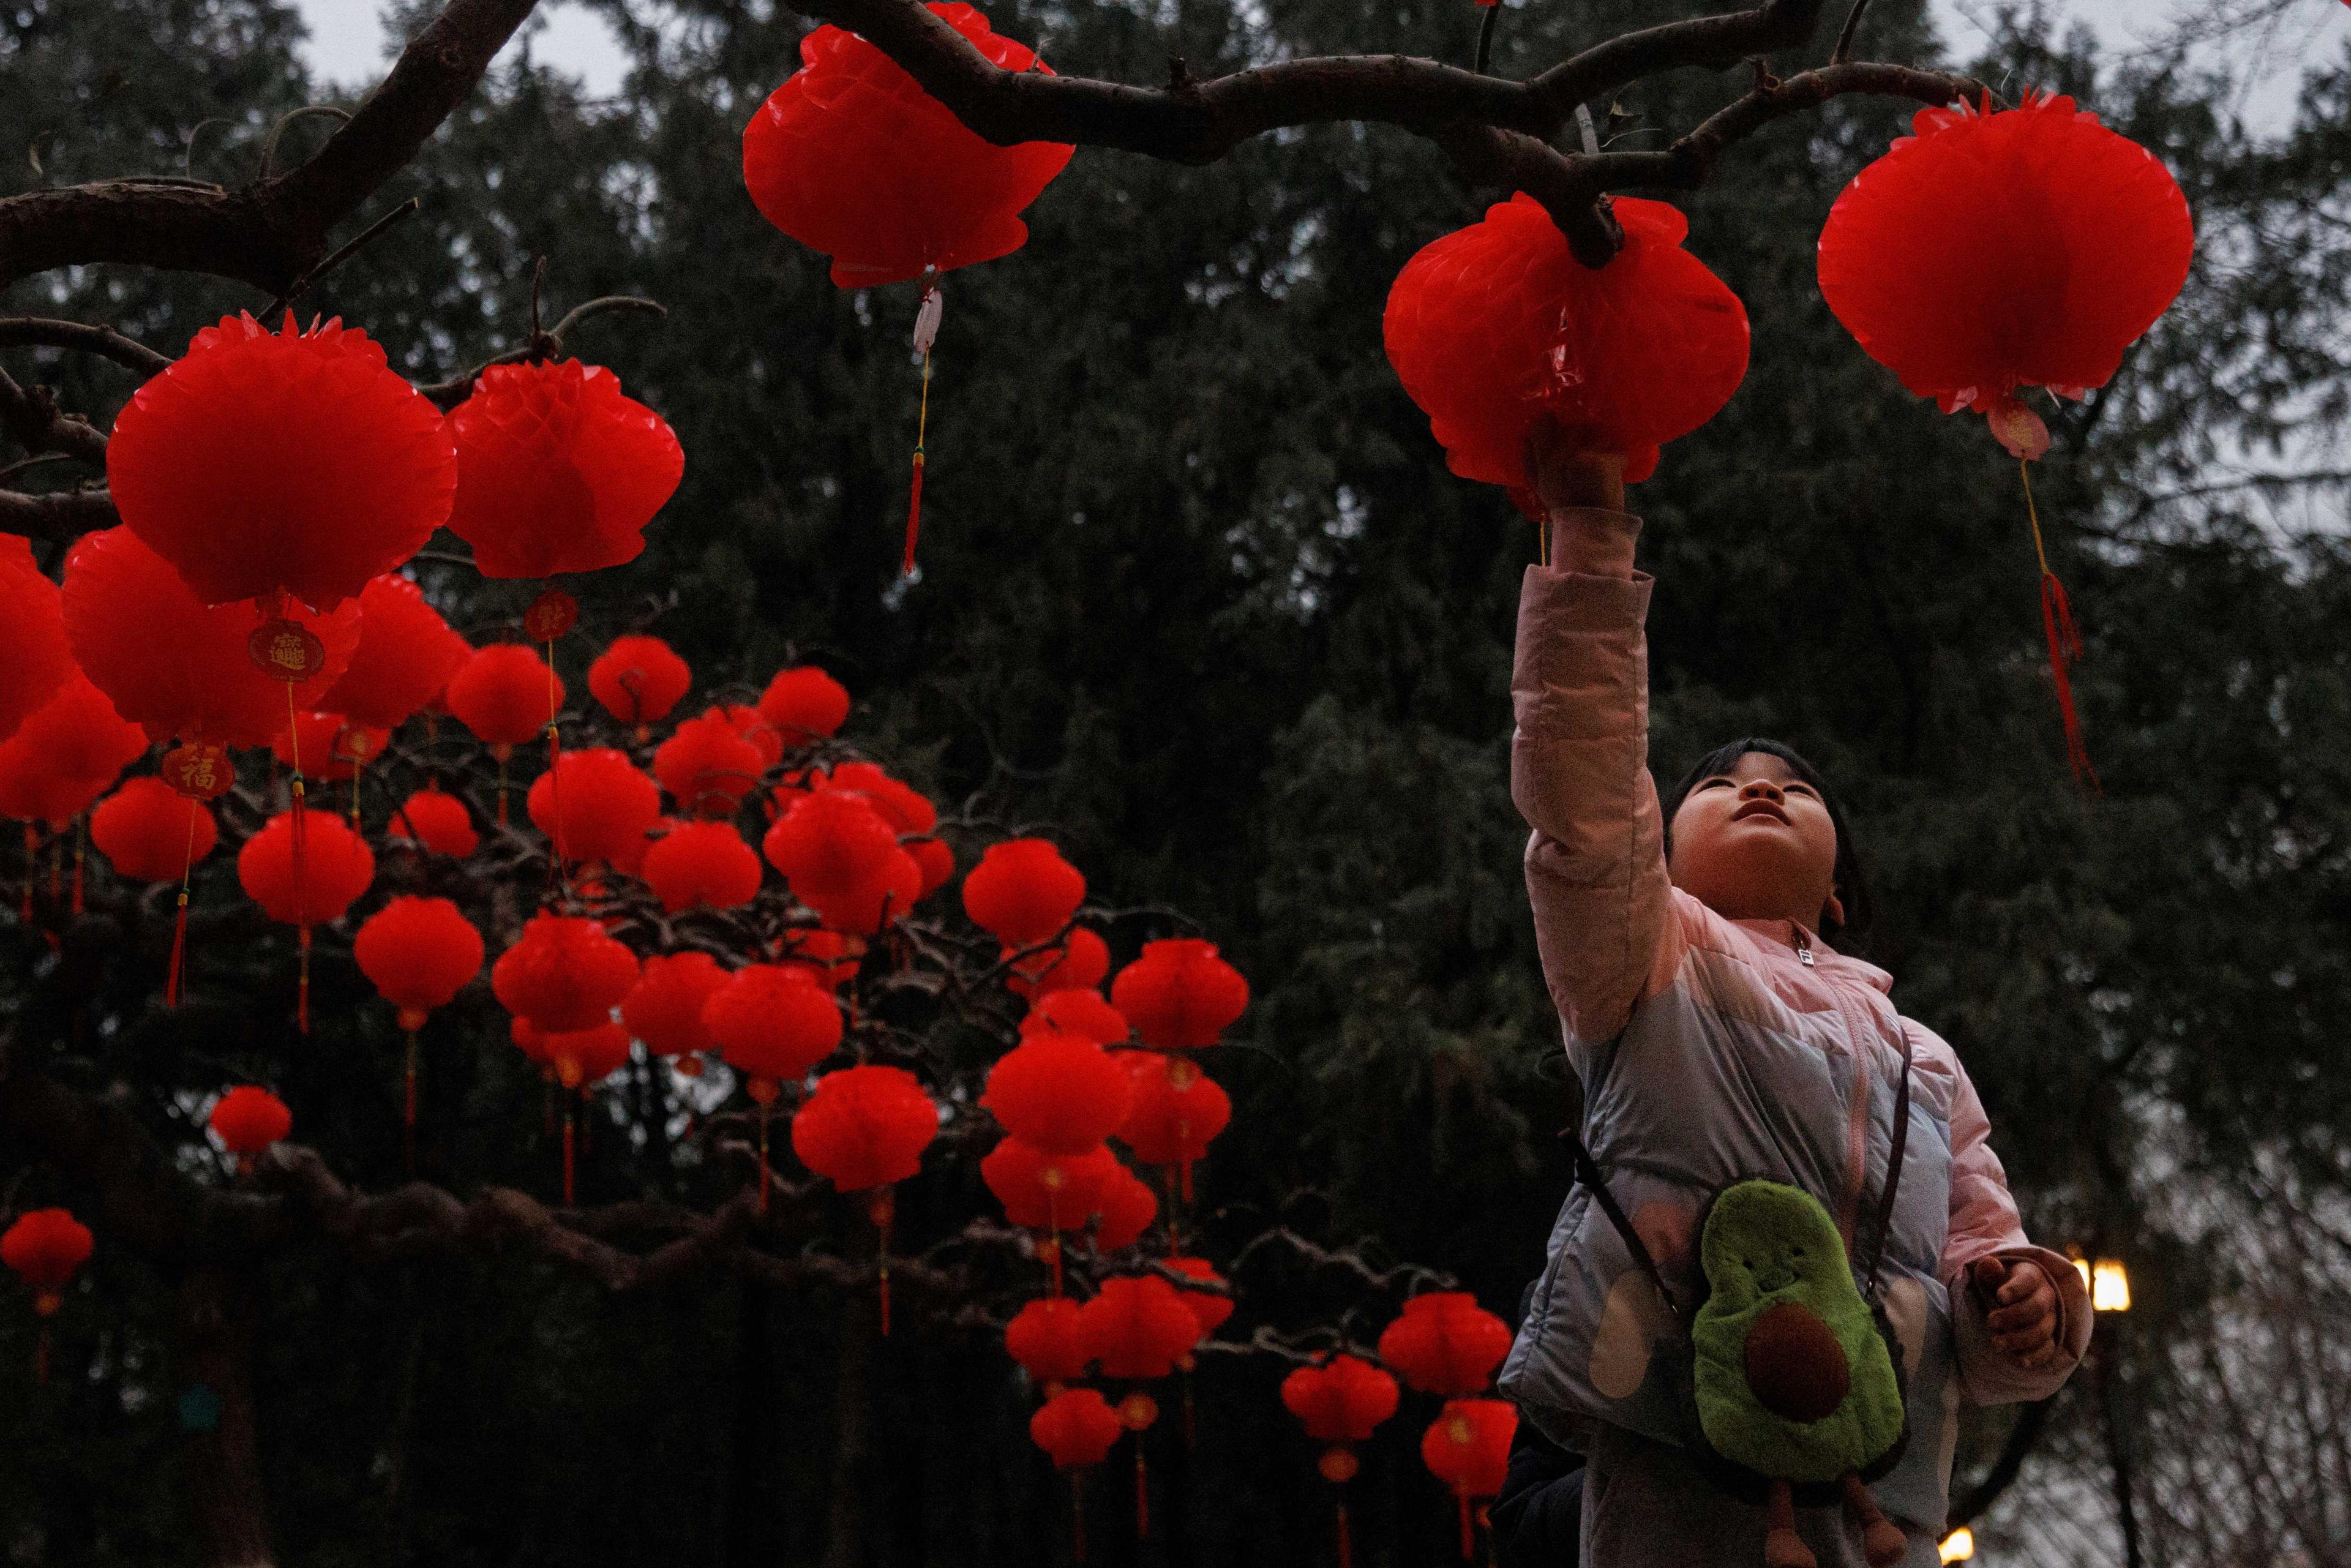 A child reaches for Spring Festival ornaments in a park ahead of Chinese Lunar New Year festivities in Beijing, China Jan 11. Photo: Reuters